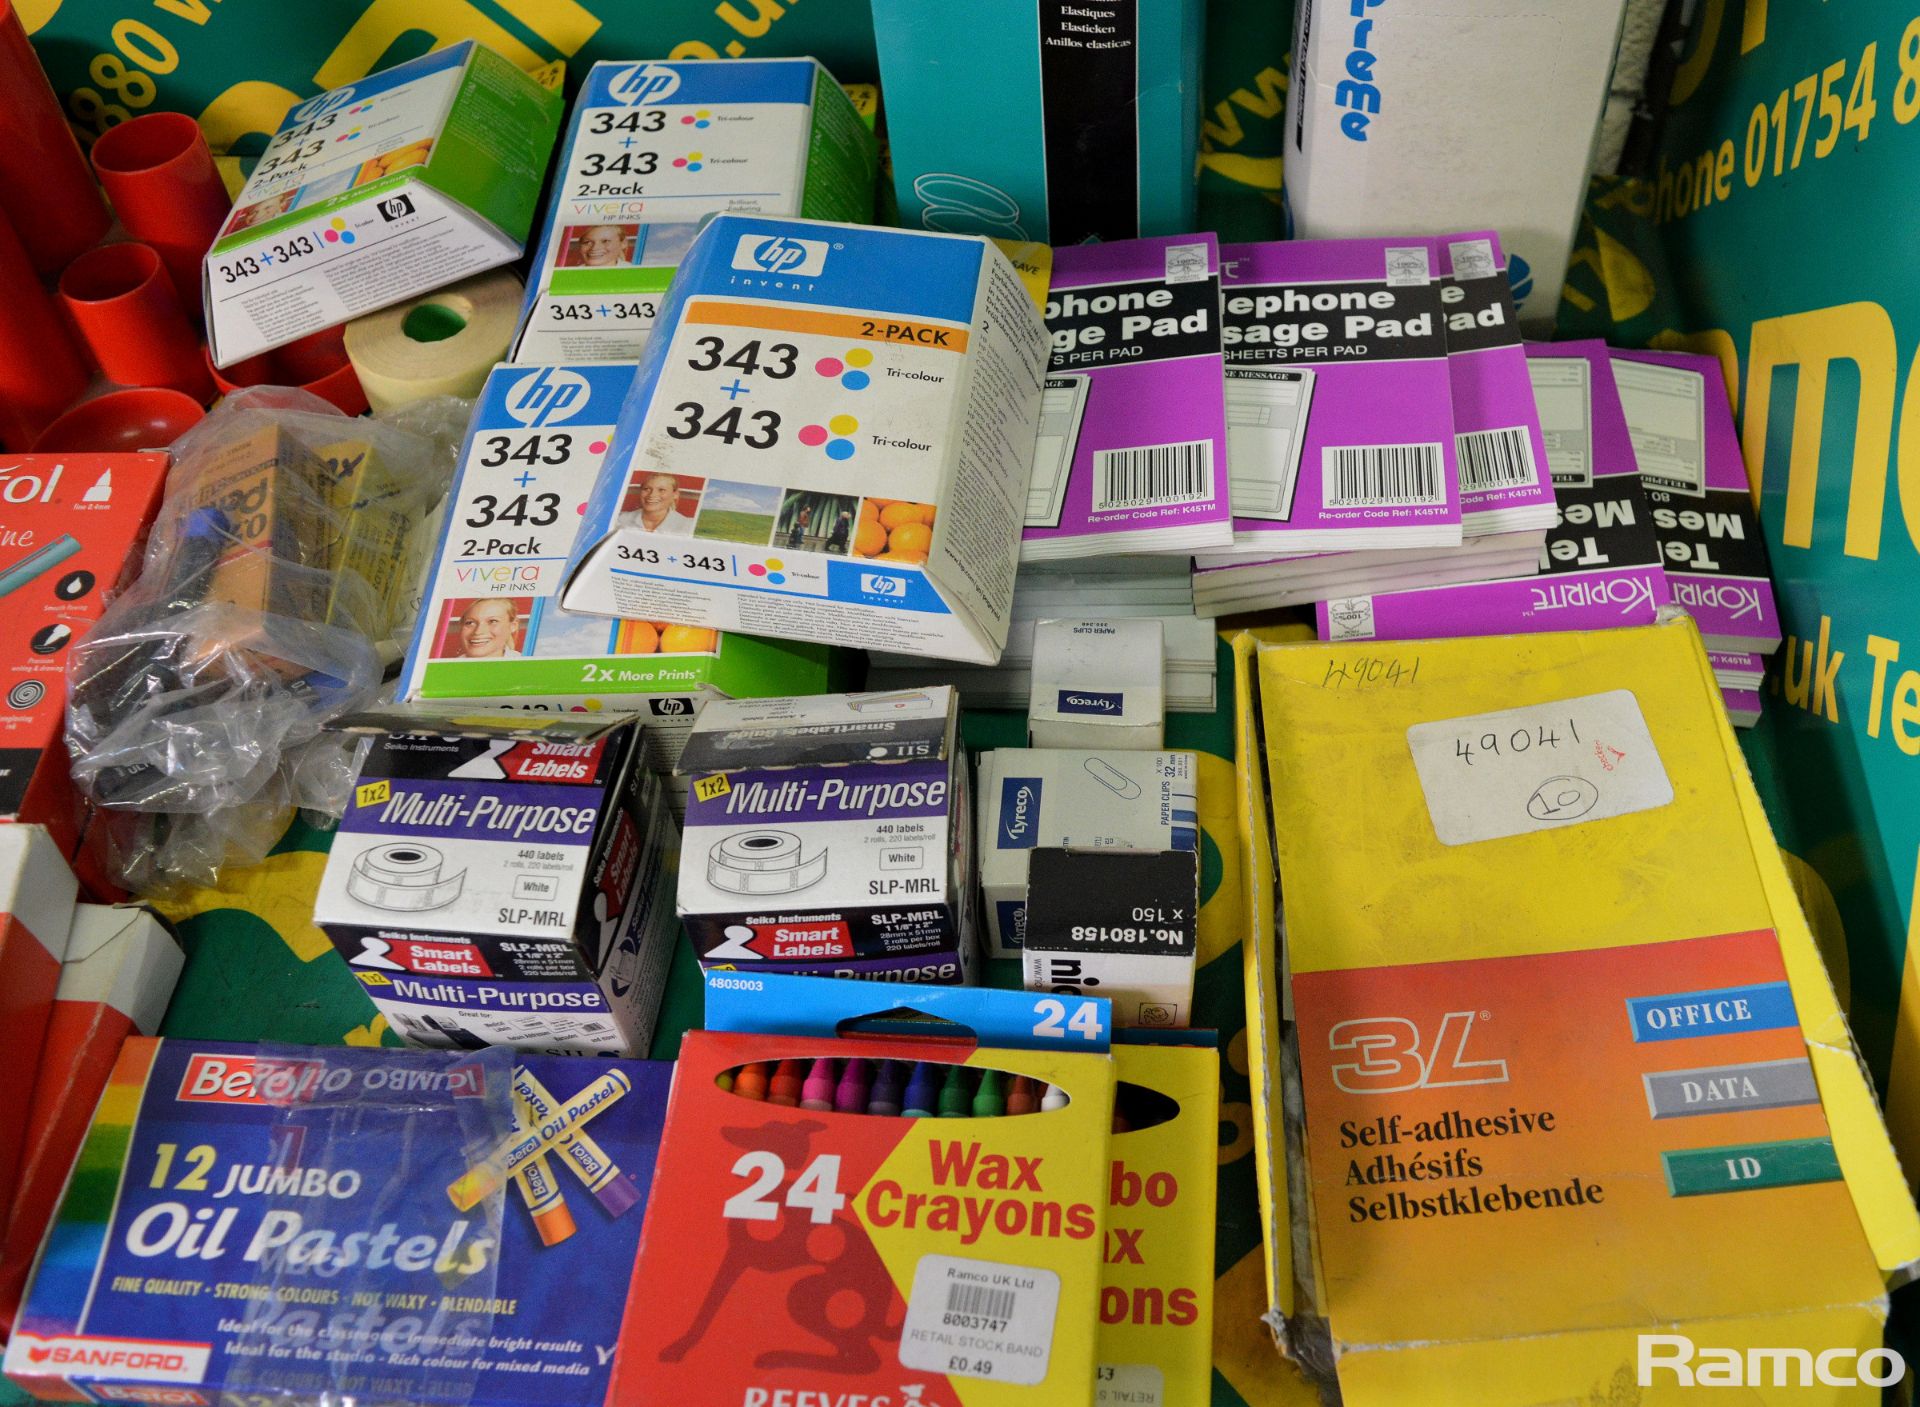 Various stationary - printer ink cartridges, pens, rubber bands, labels, telephone message and more - Image 4 of 4